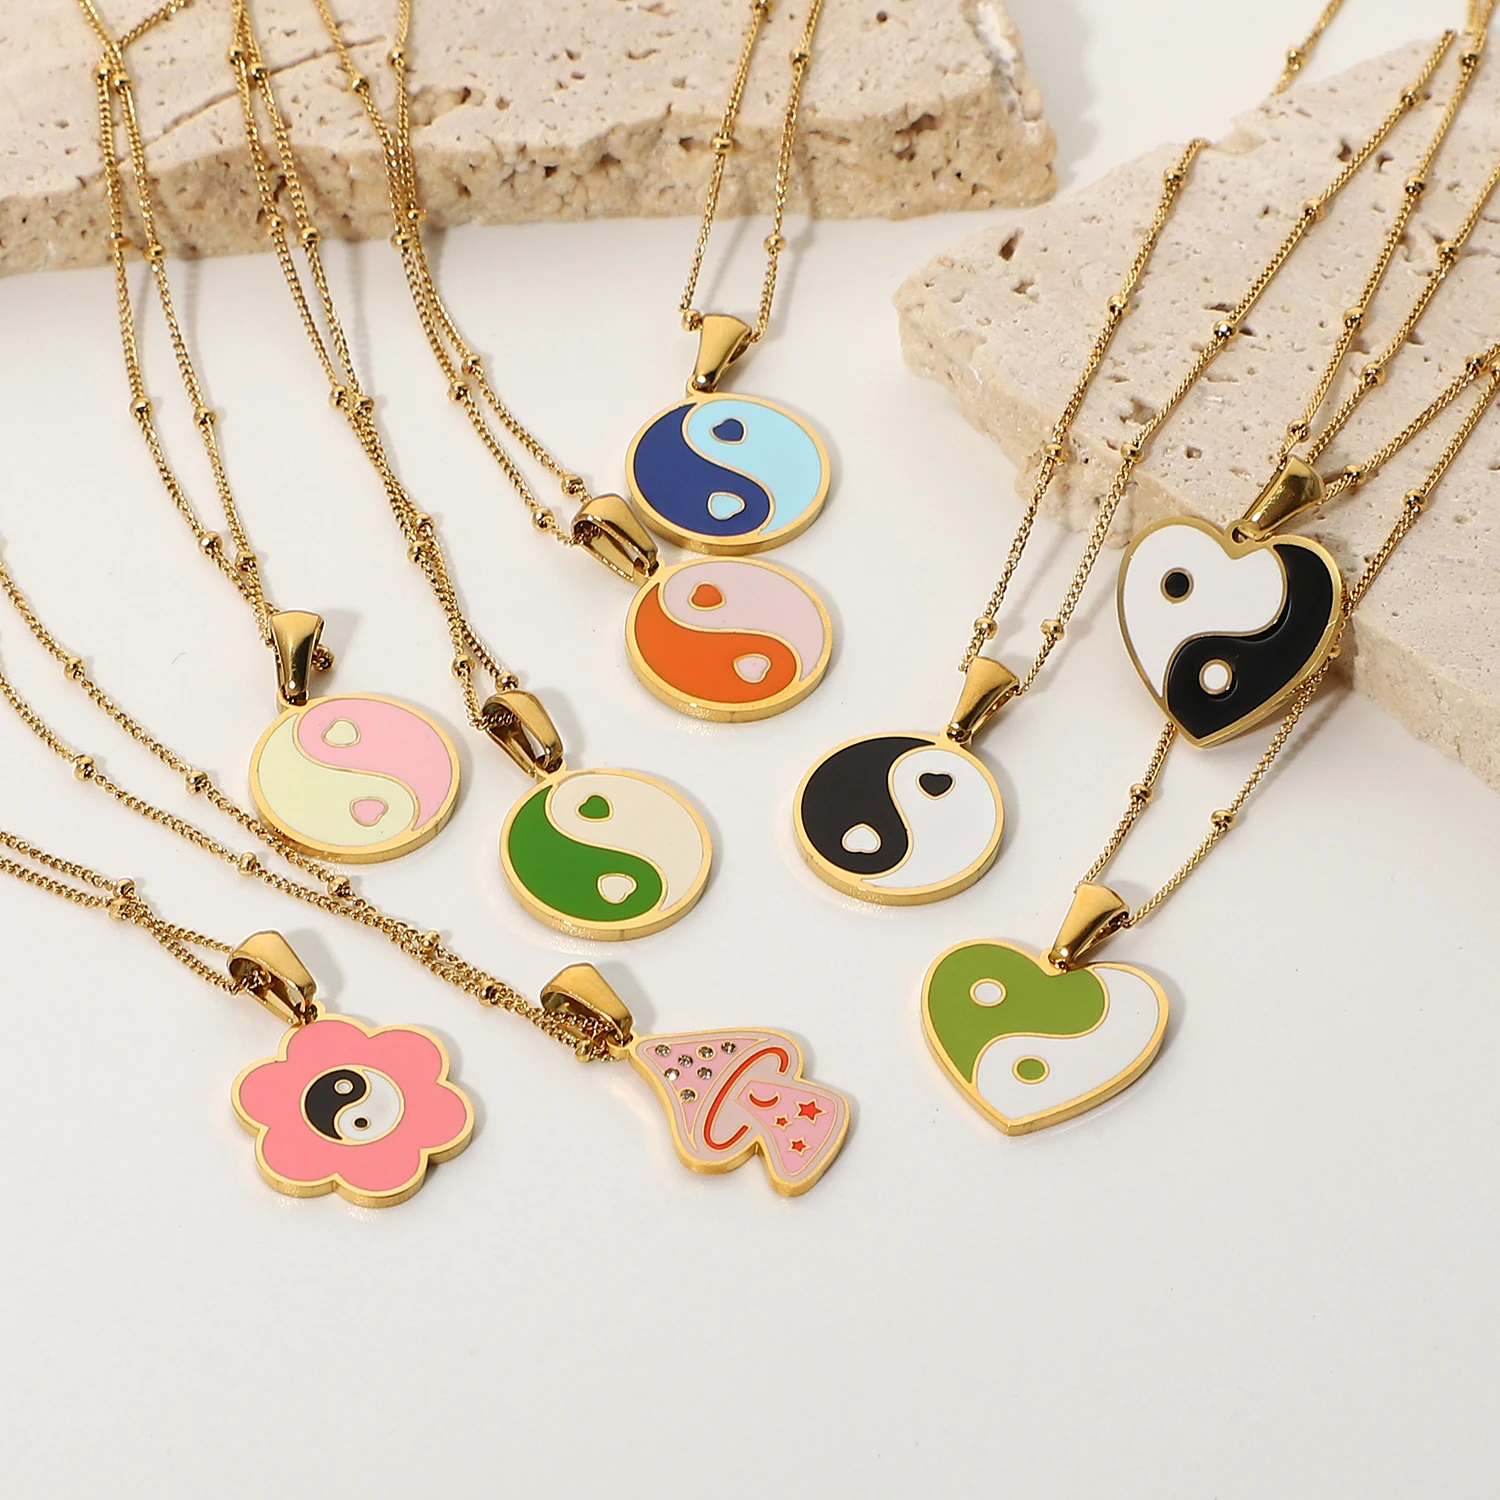 

18K Gold Plated Stainless Steel Colorful Yin yang heart Mushroom enamel heart necklace for women Balance pendant necklace